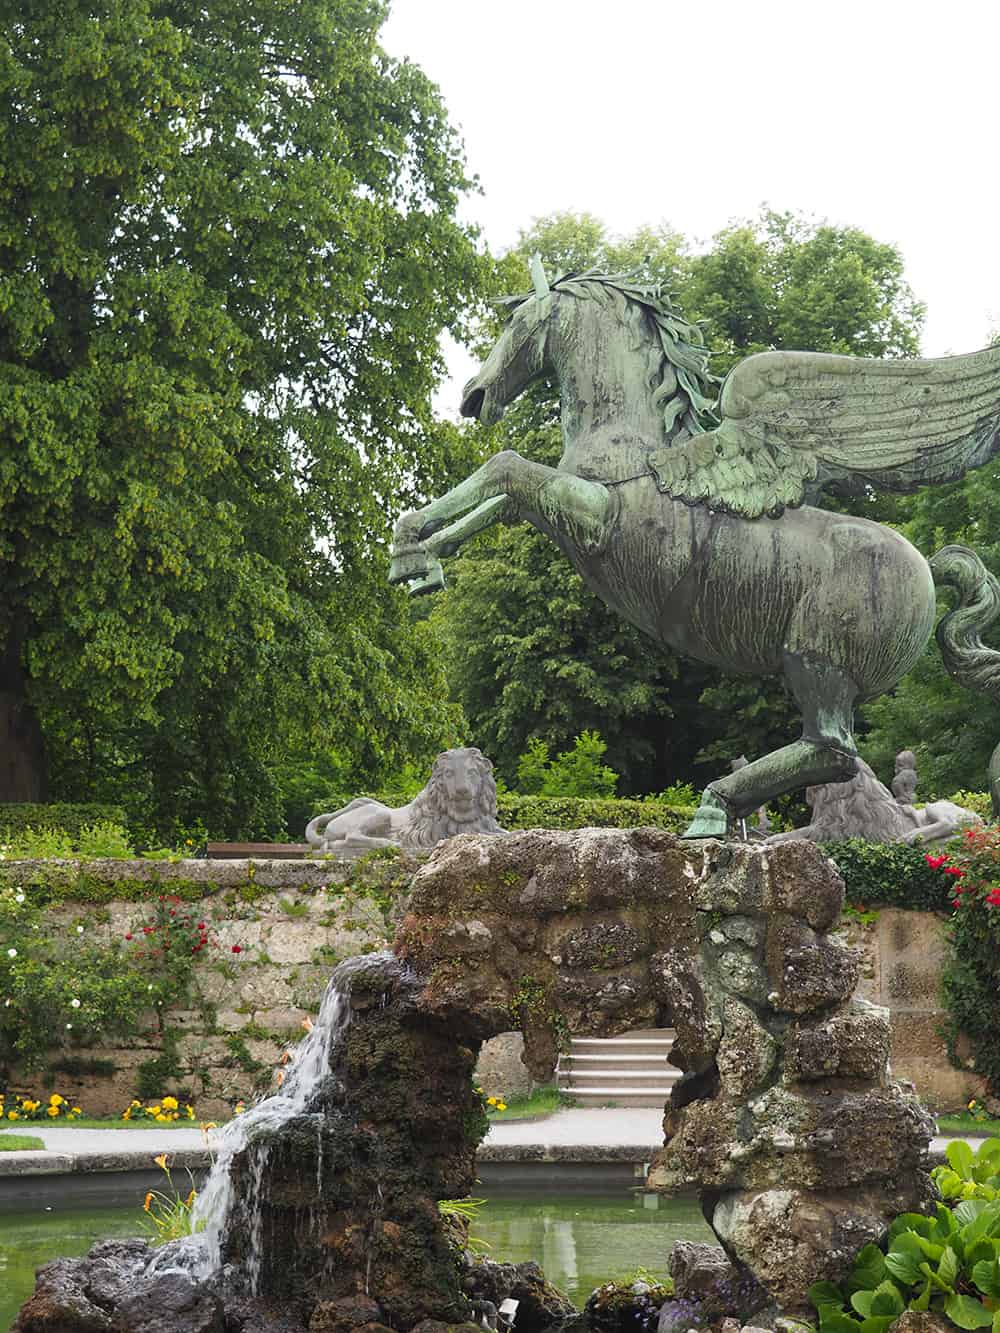 Mirabell Palace was constructed in the 1600s. The palace's gardens were filmed multiple times in The Sound of Music and the surrounding gardens have a lot of sculptures represented from mythology. | via Autumn All Along